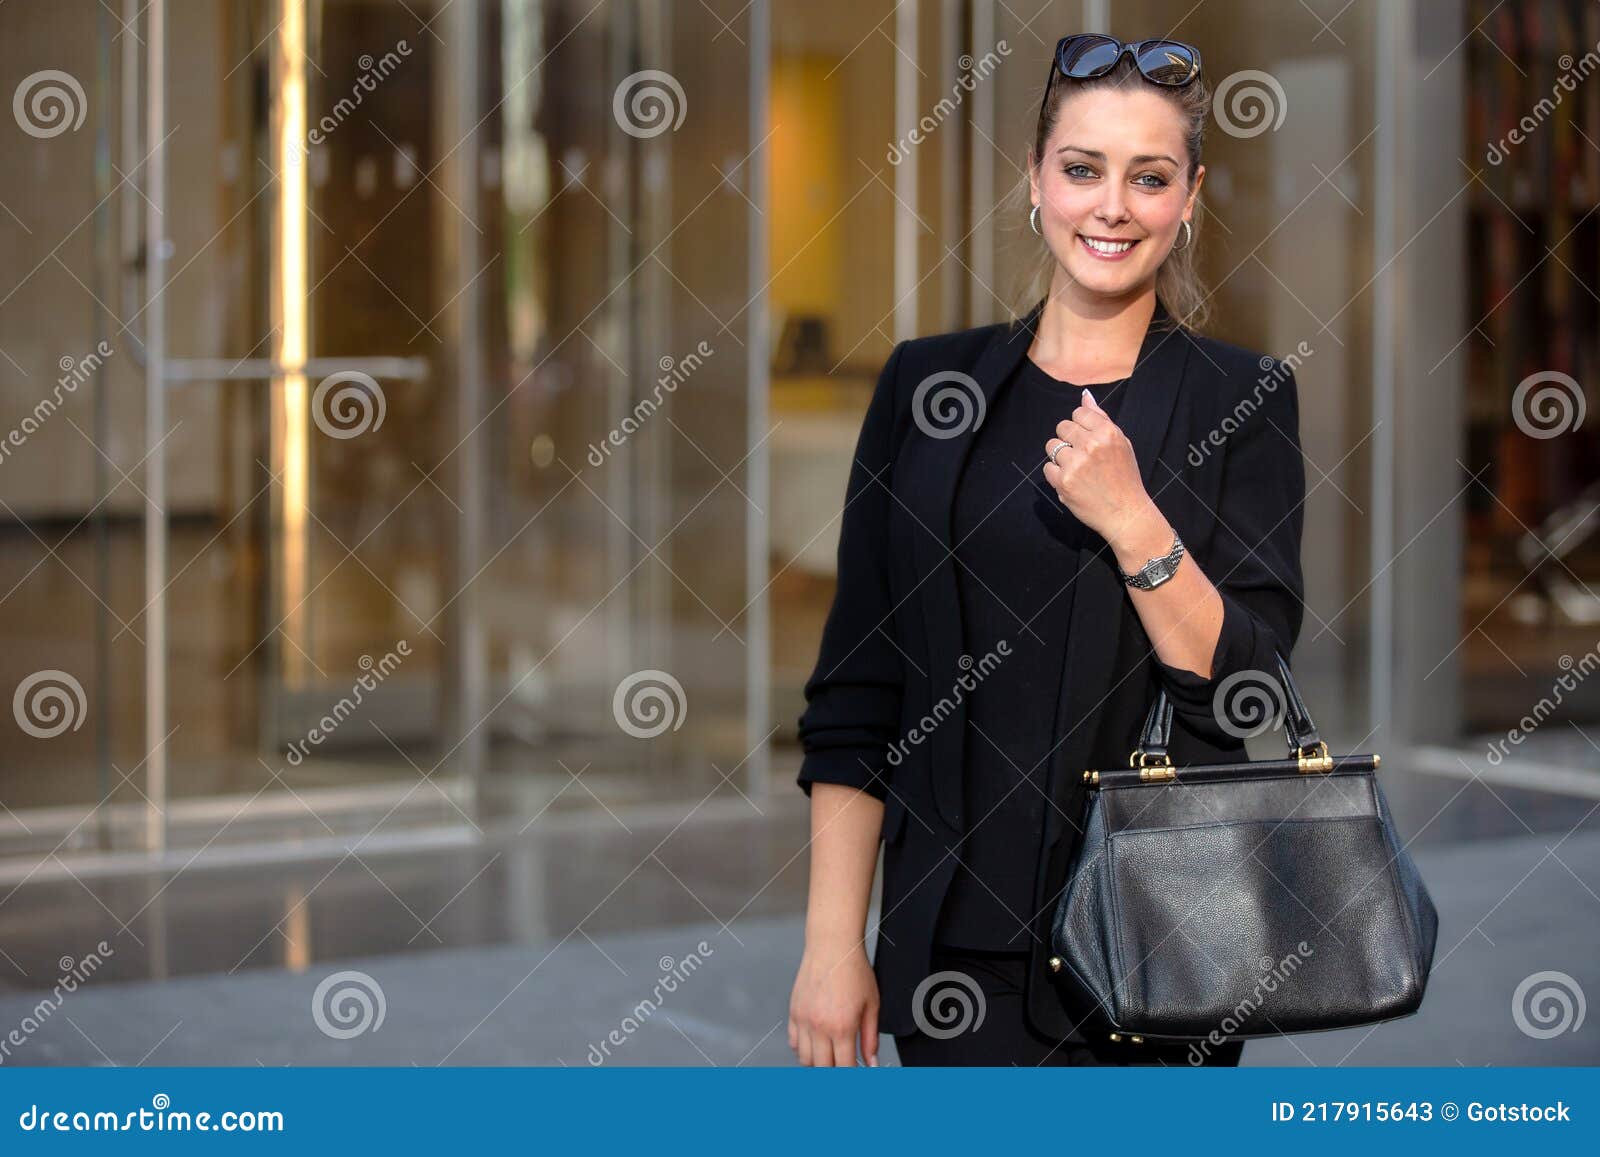 Standing Portrait of a Successful and Affluent Modern Businesswoman ...